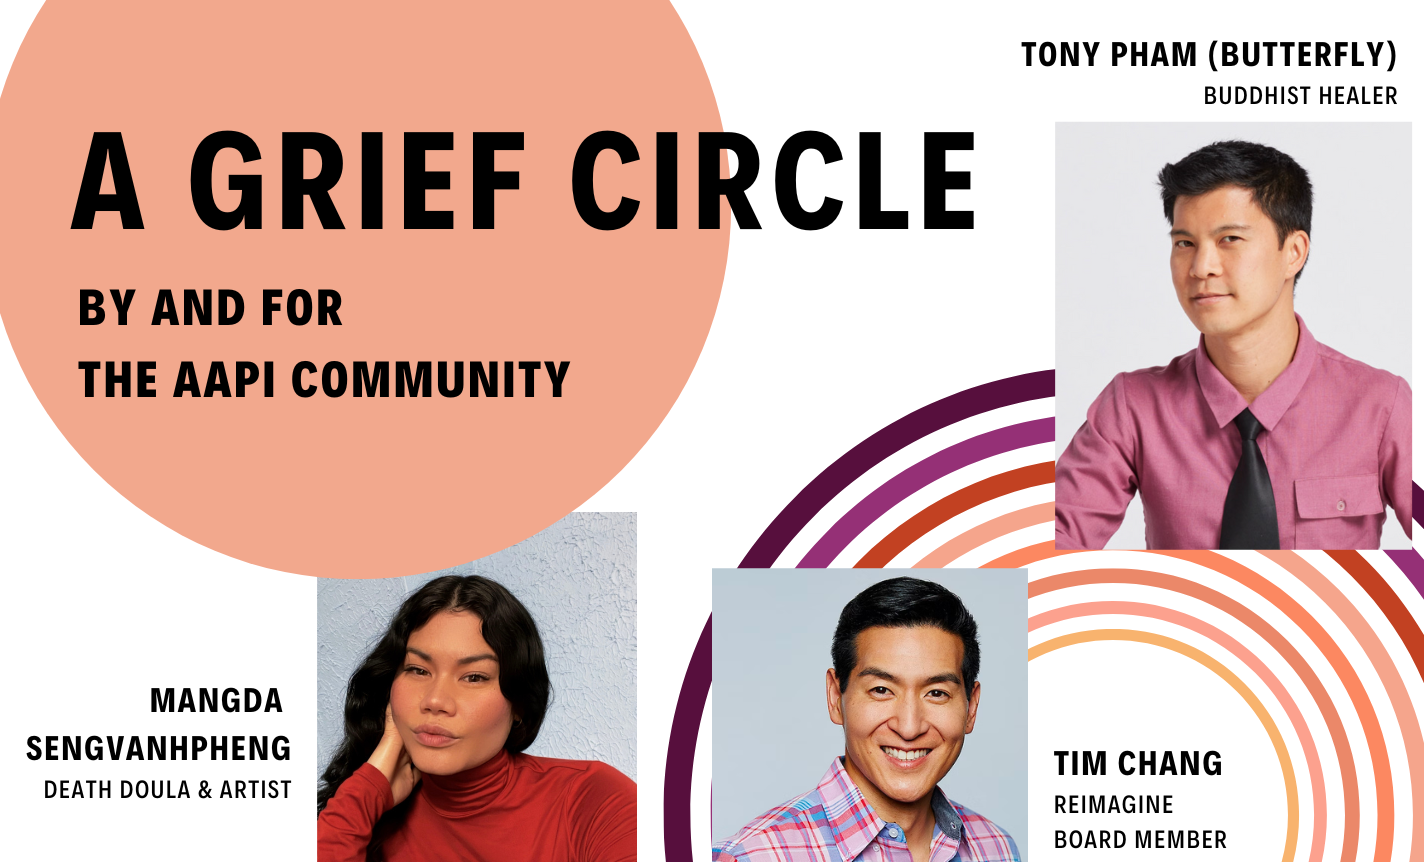 A Grief Circle, by and for the AAPI Community